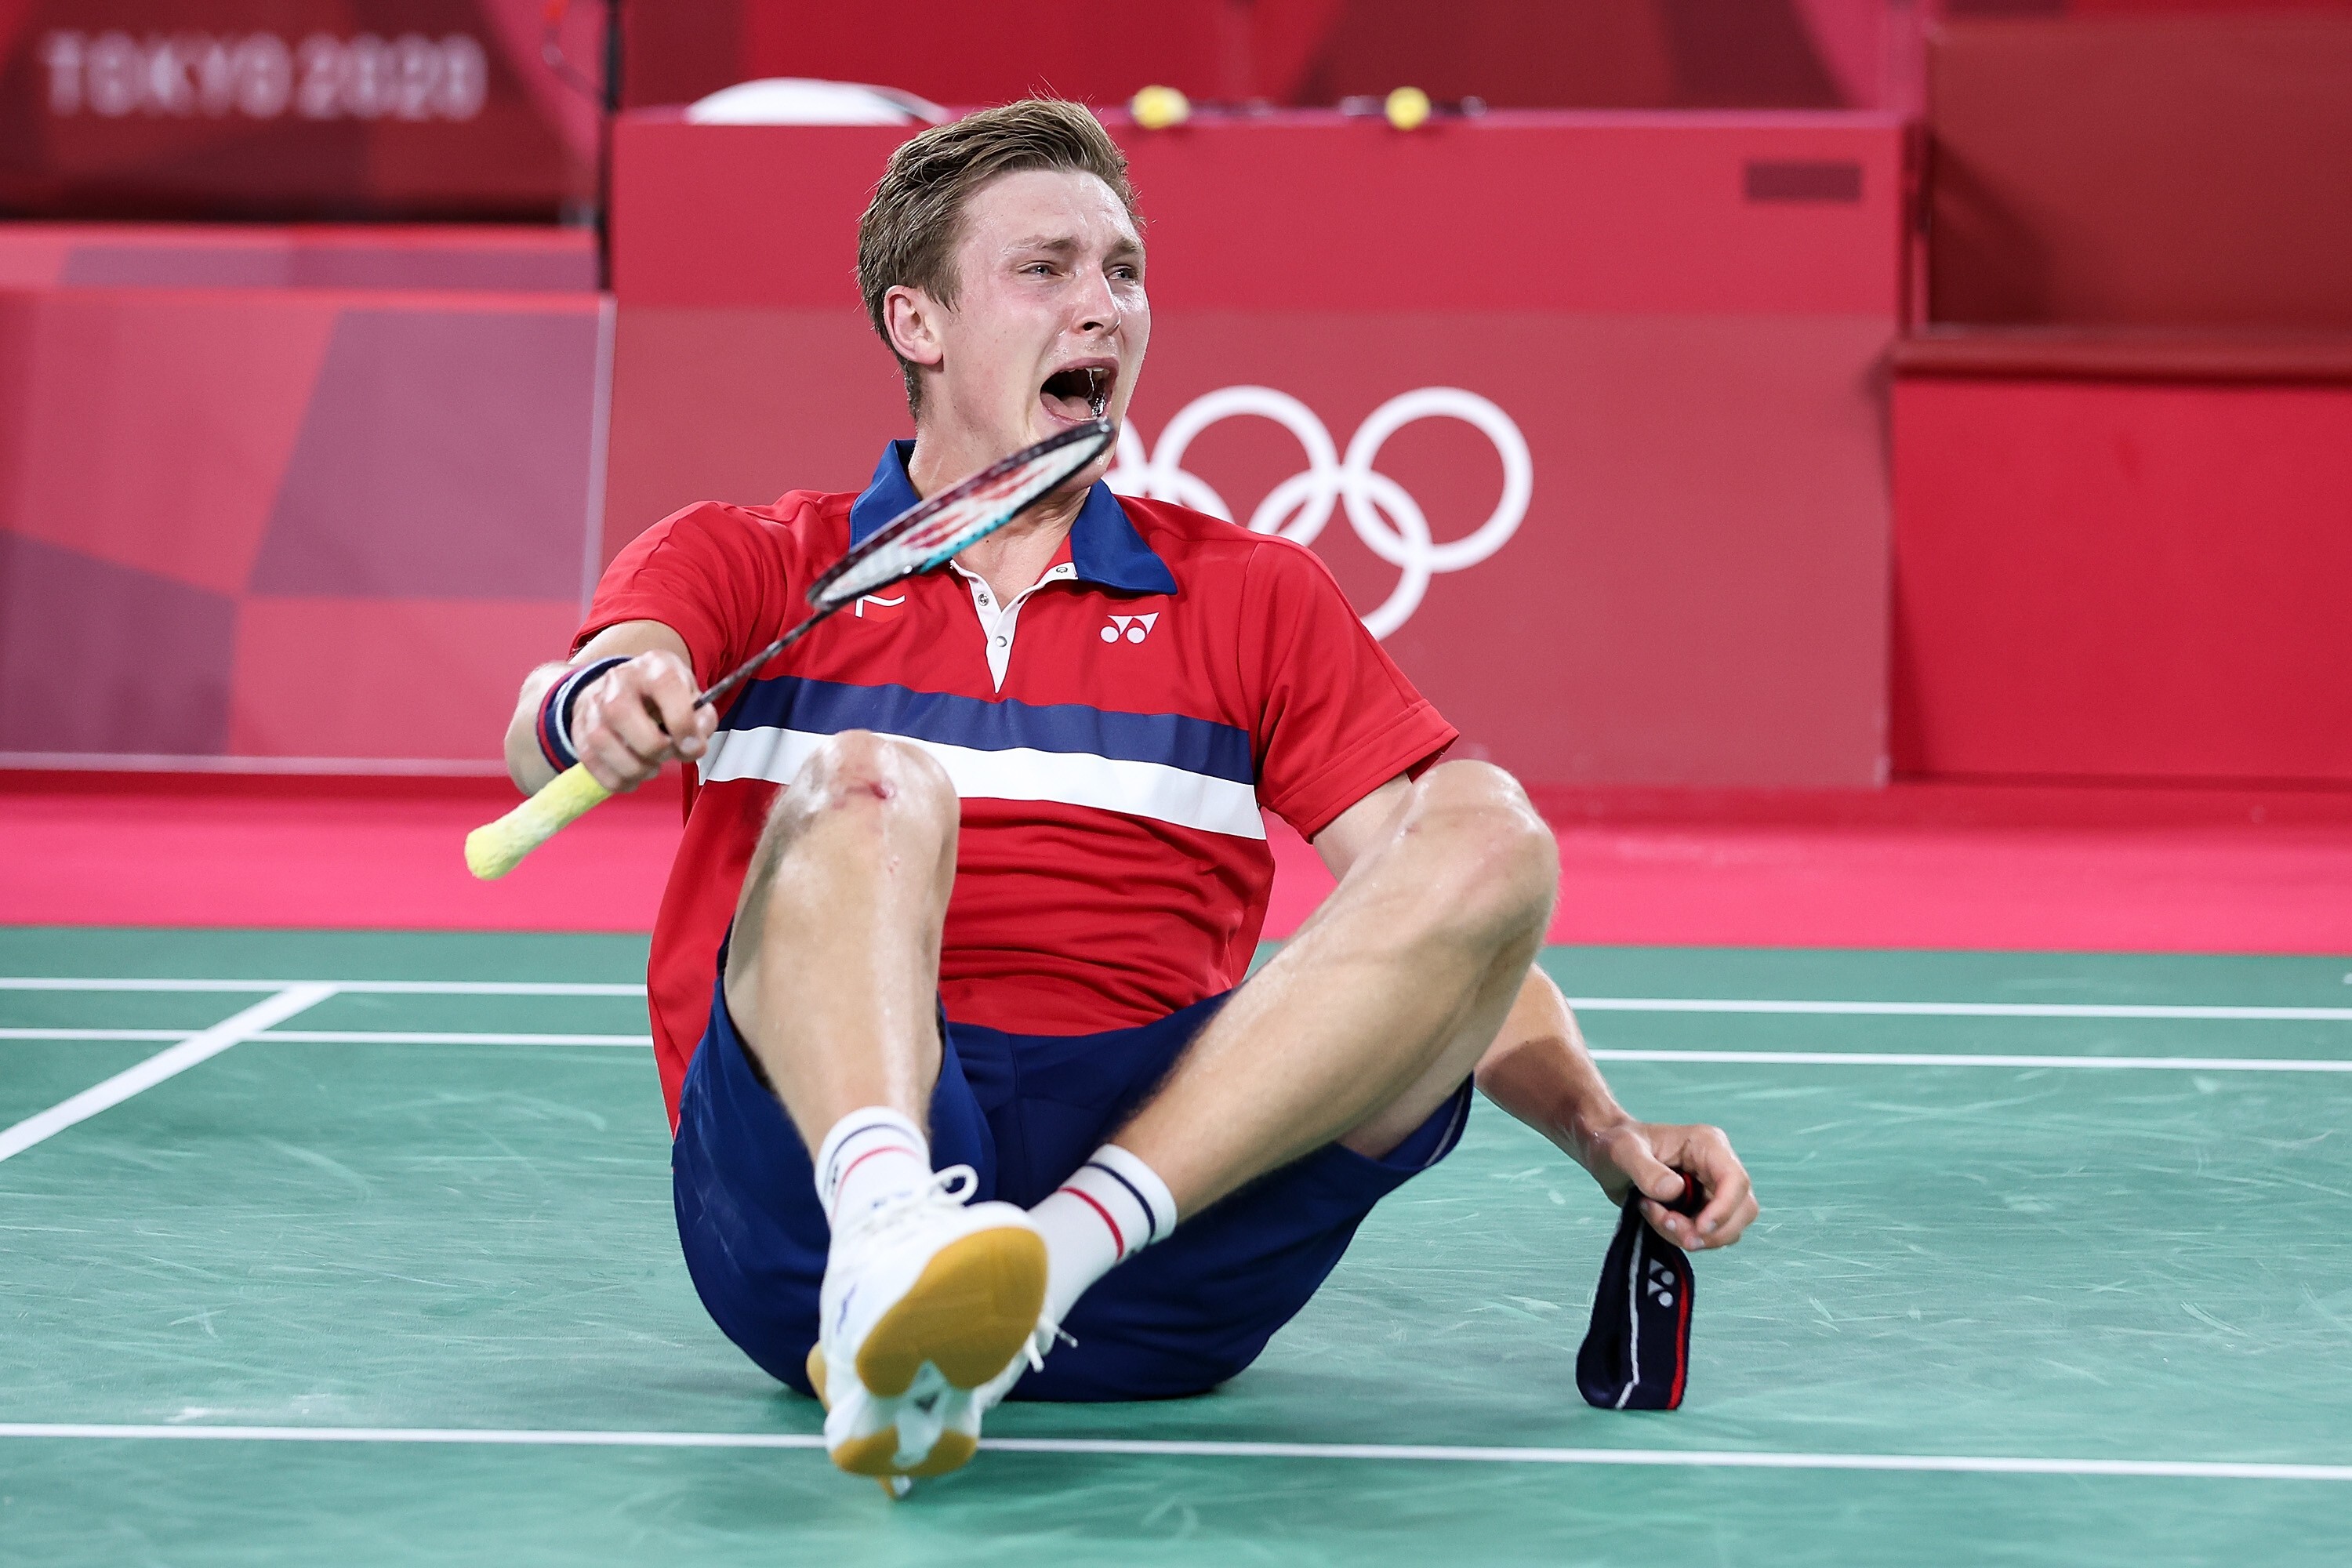 Viktor Axelsen of Team Denmark celebrates after winning the men’s singles gold medal at the Tokyo 2020 Olympic Games. Photo: Getty Images